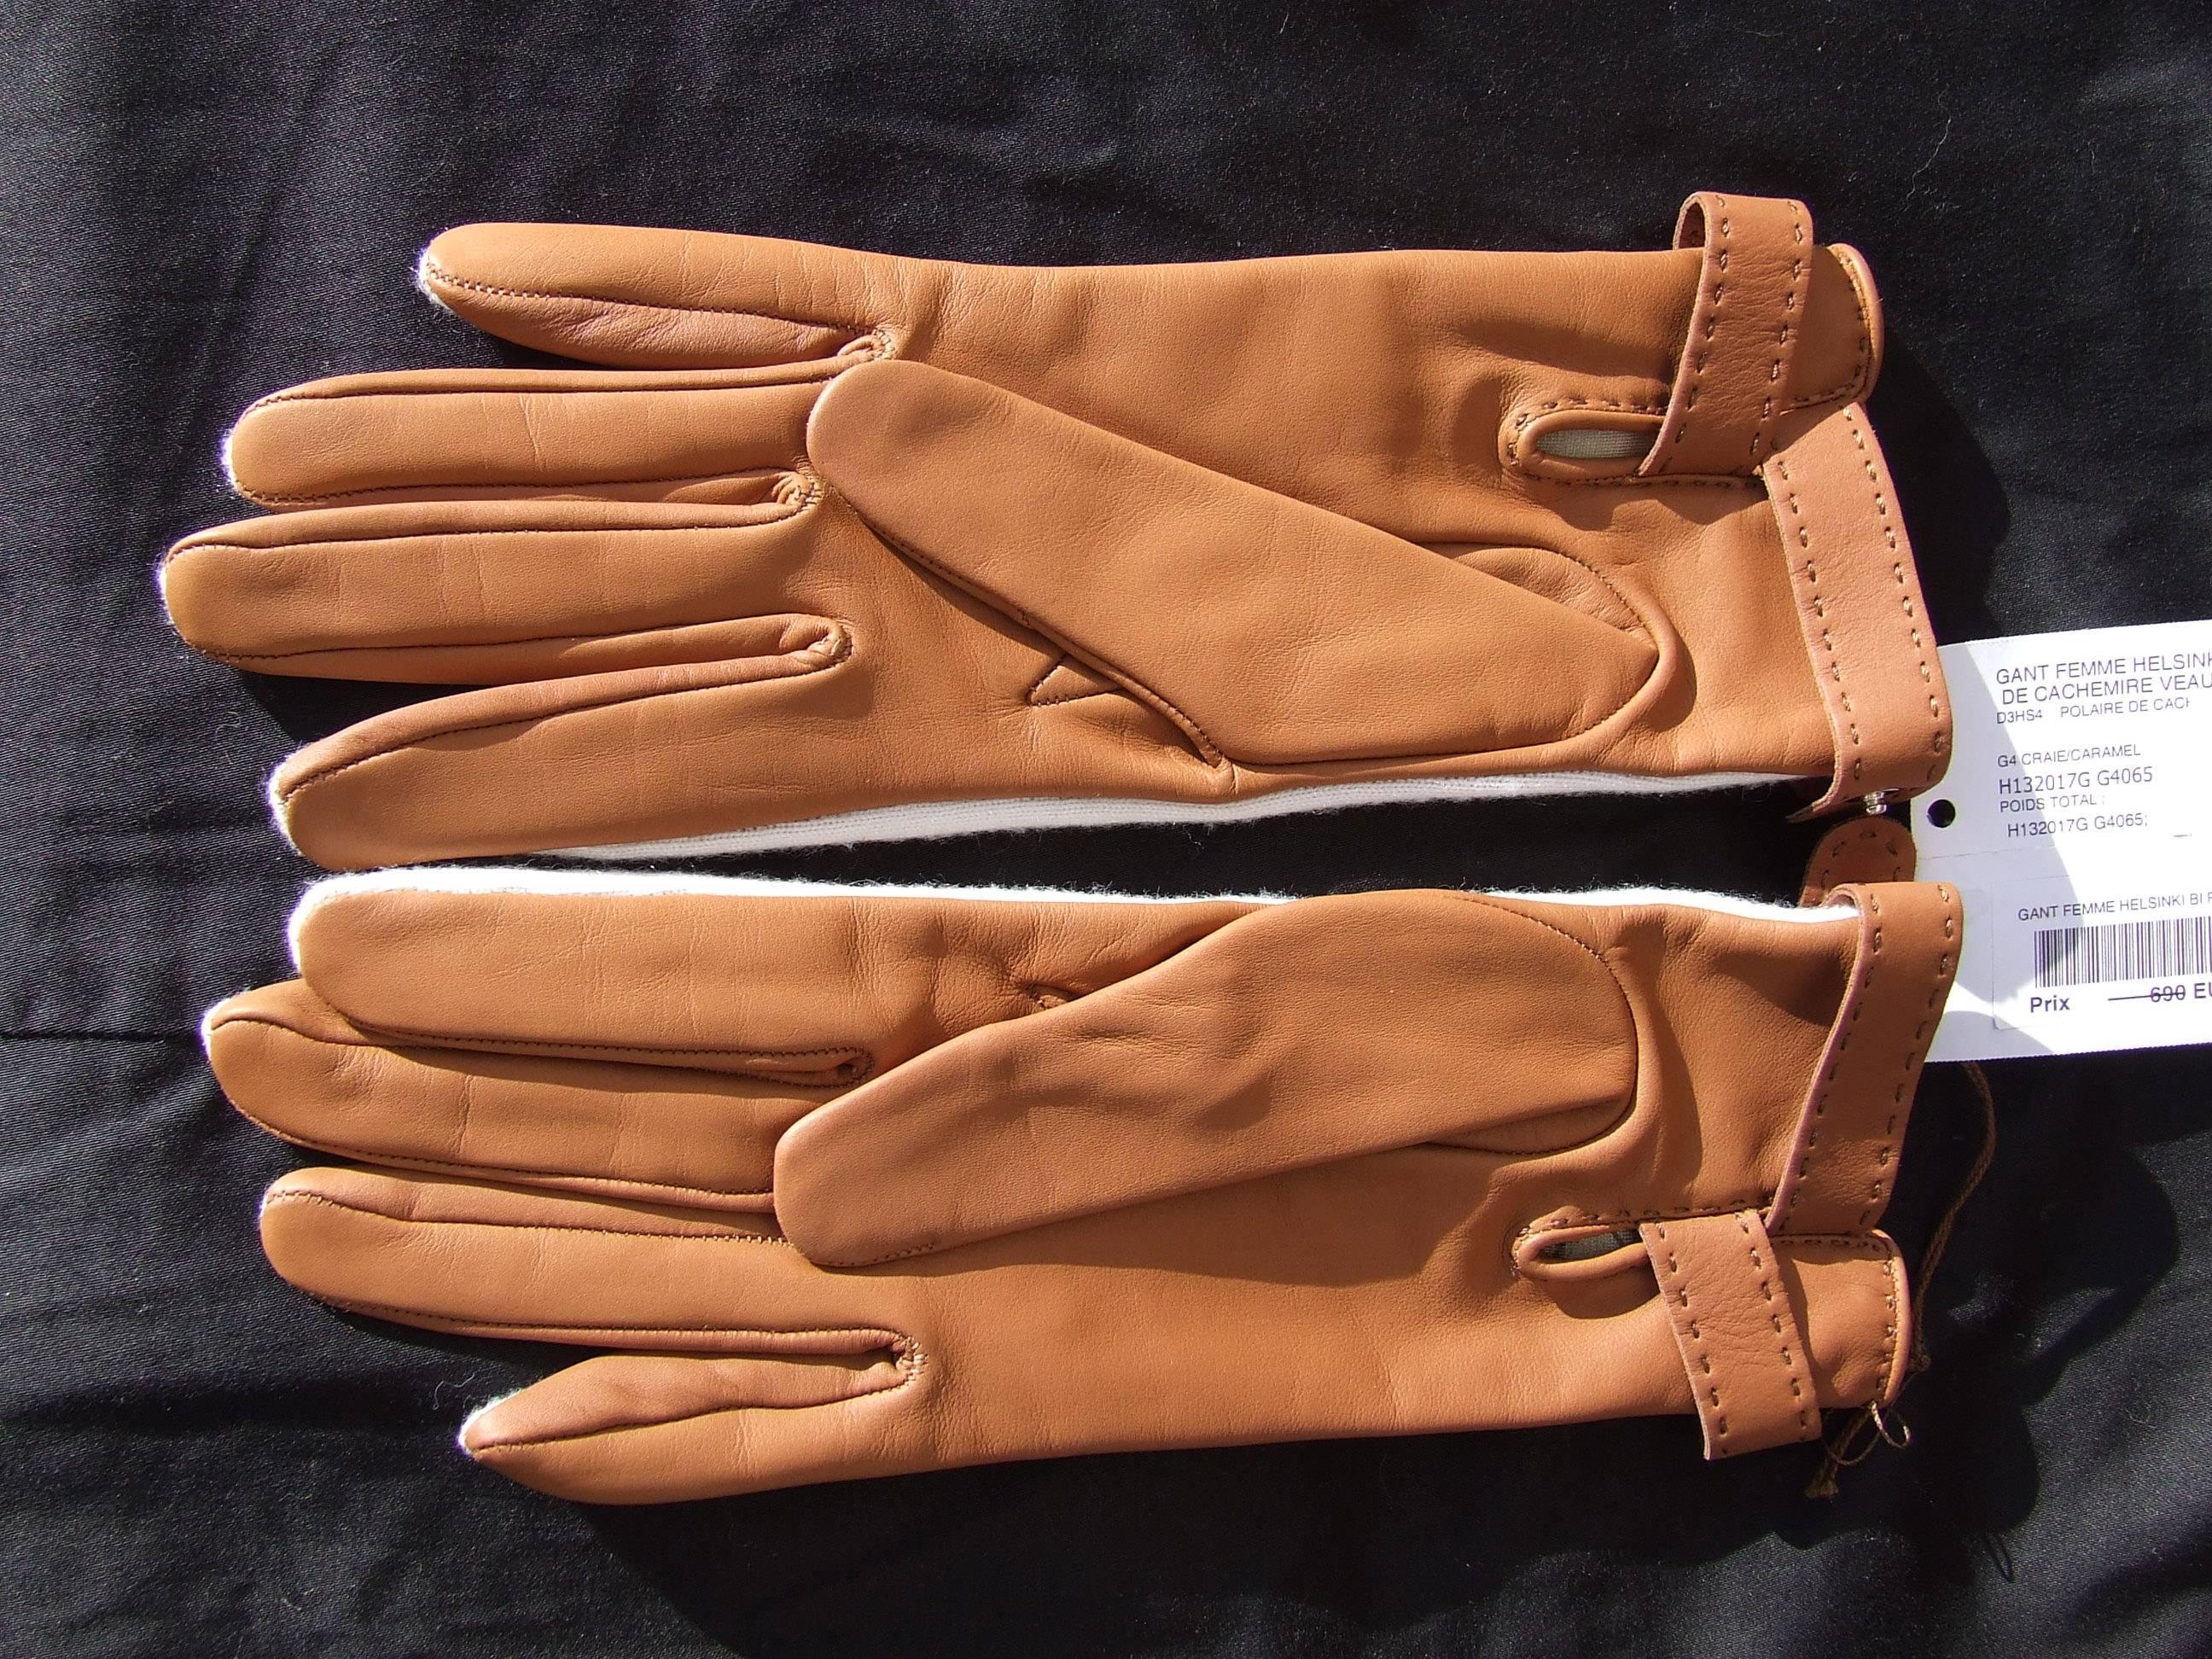 Hermès Helsinki Women Gloves in Cashmere and Leather Size 6, 5 For Sale 3